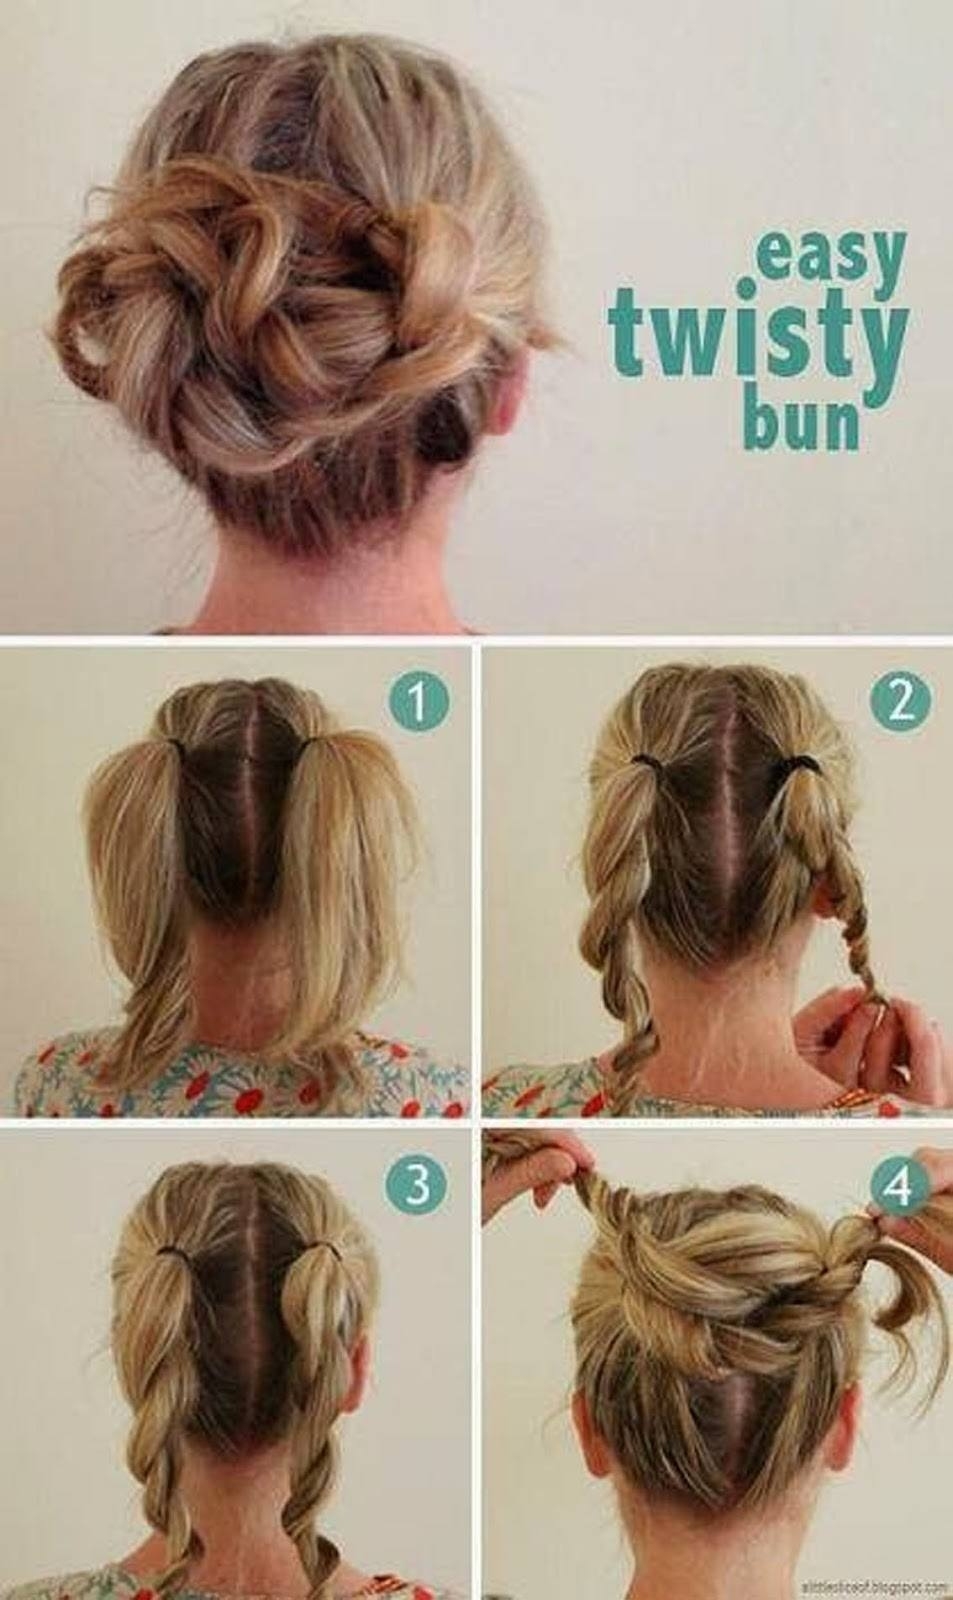 25 Five Minute Or Less Hairstyles That'll Save You From Busy with Simple But Effective Hairstyles